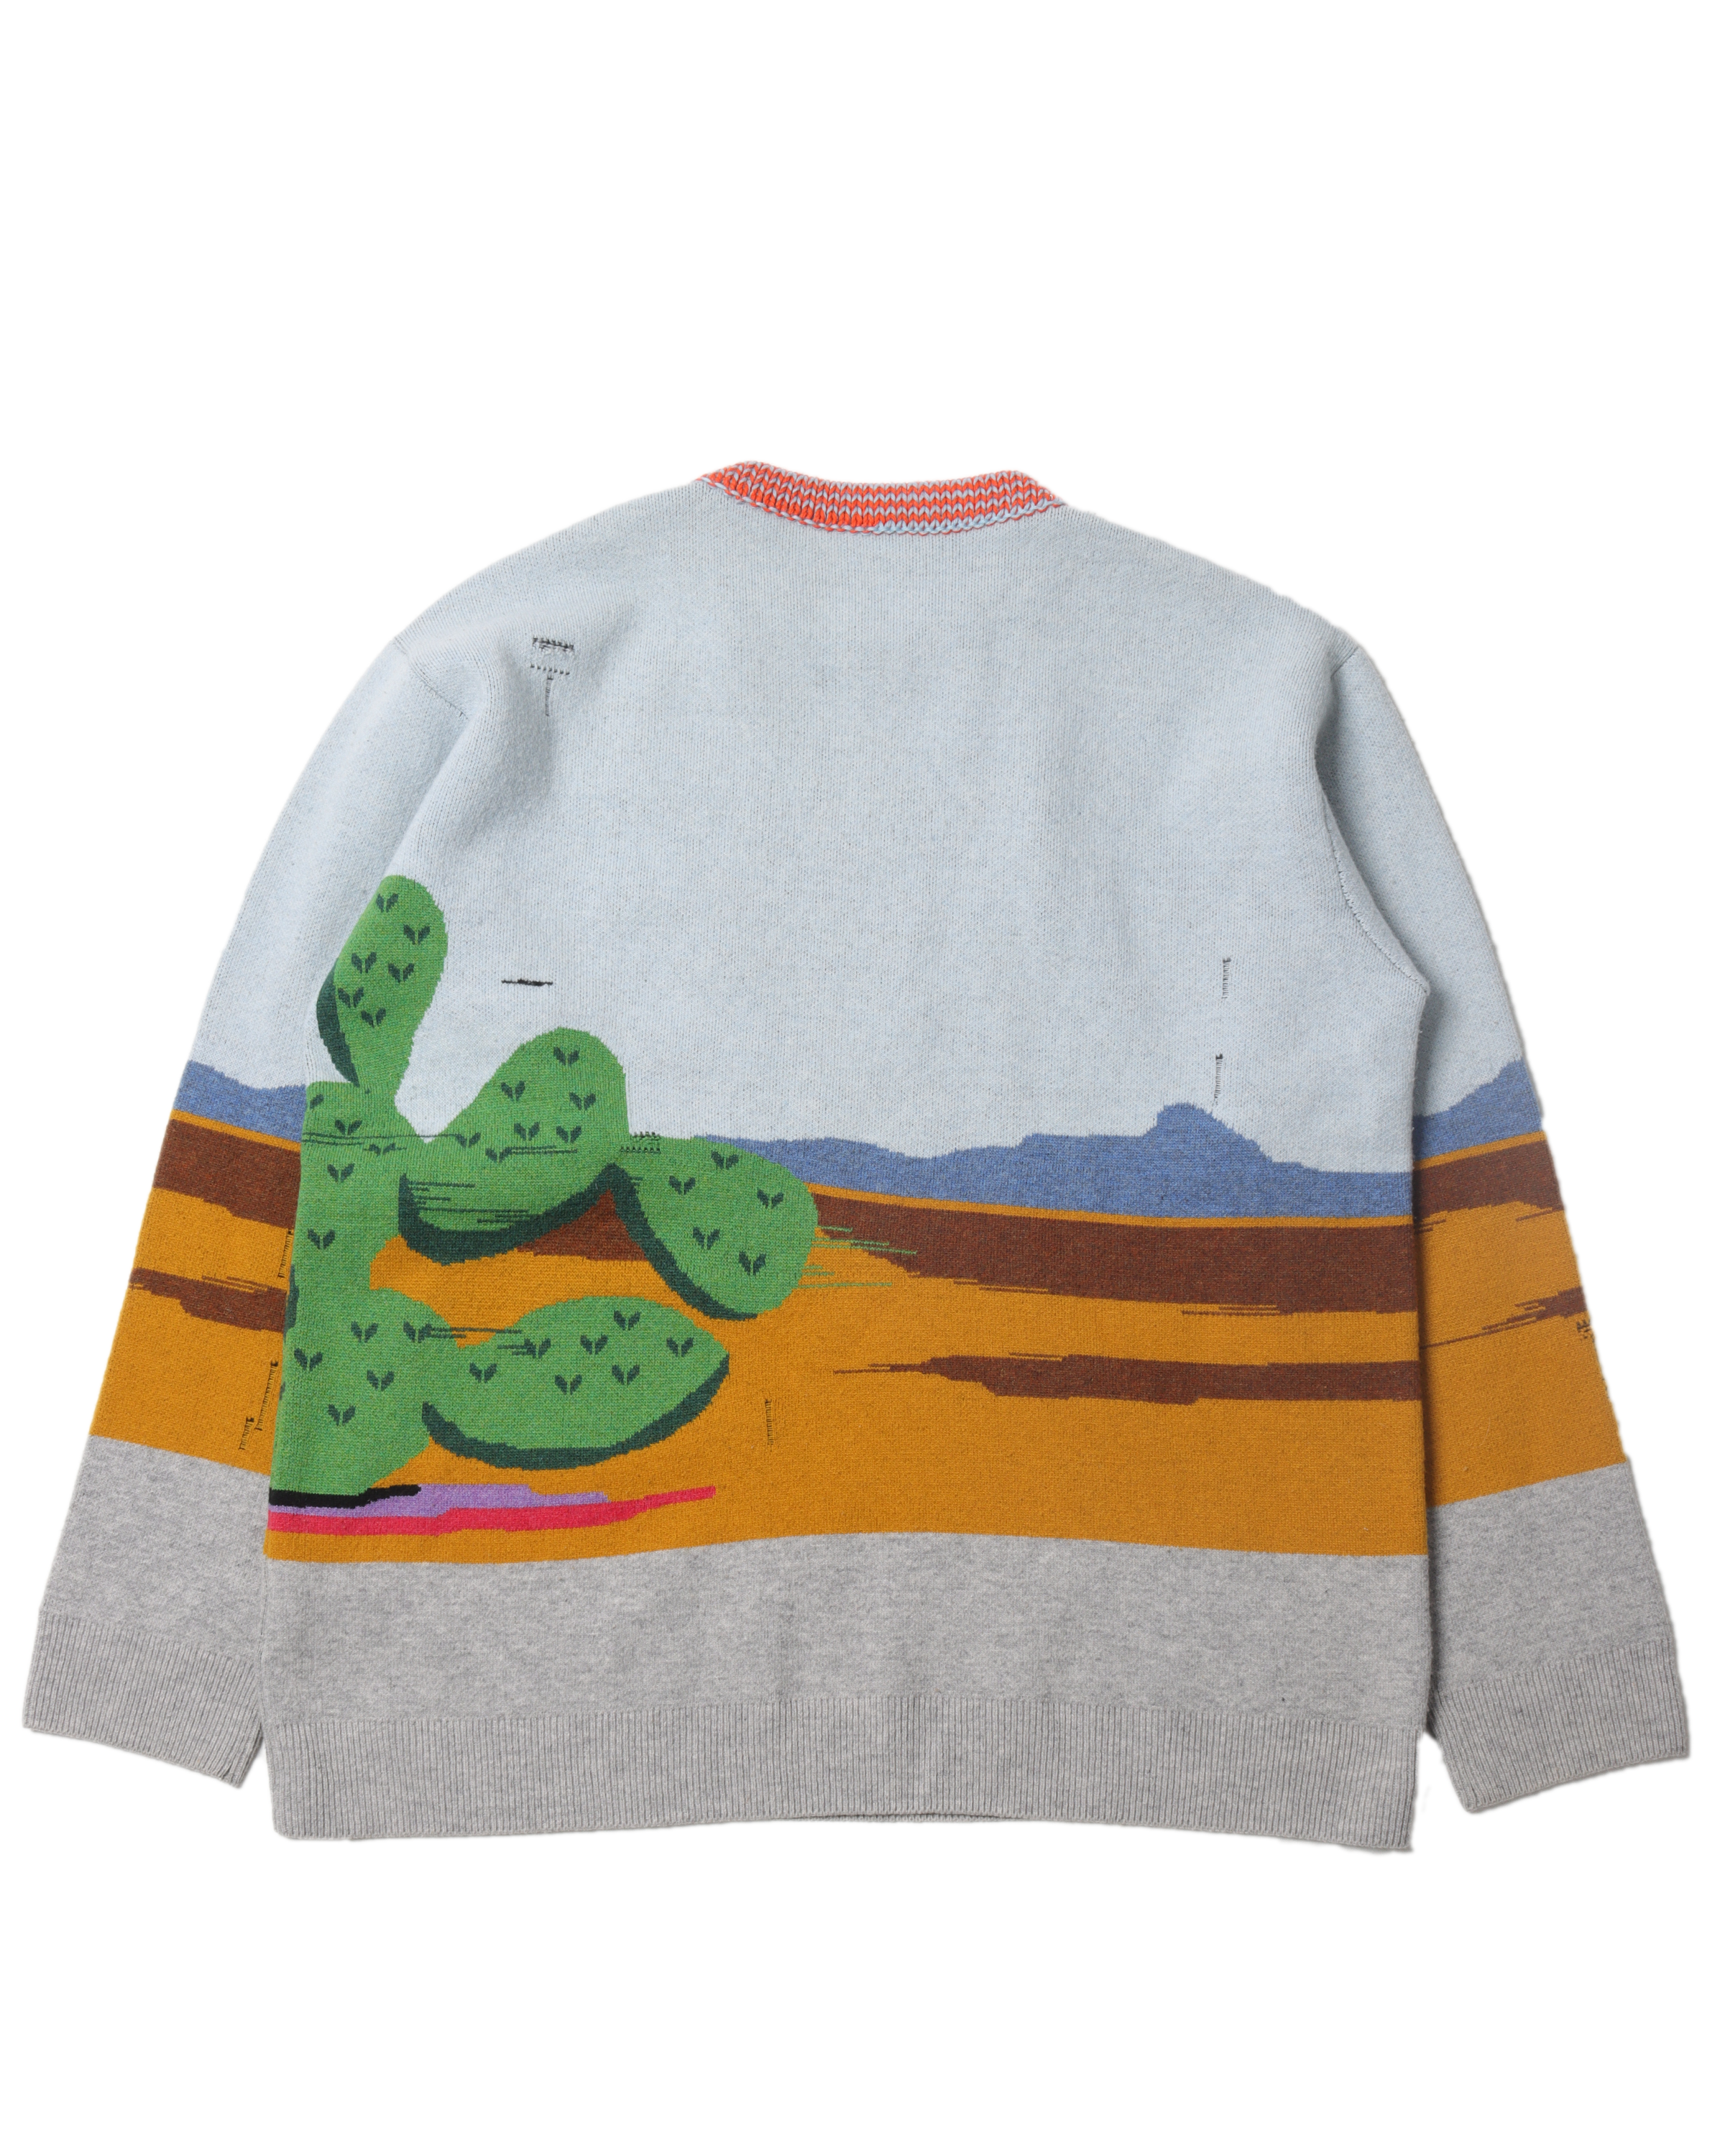 Distressed Road Runner Knit Sweater